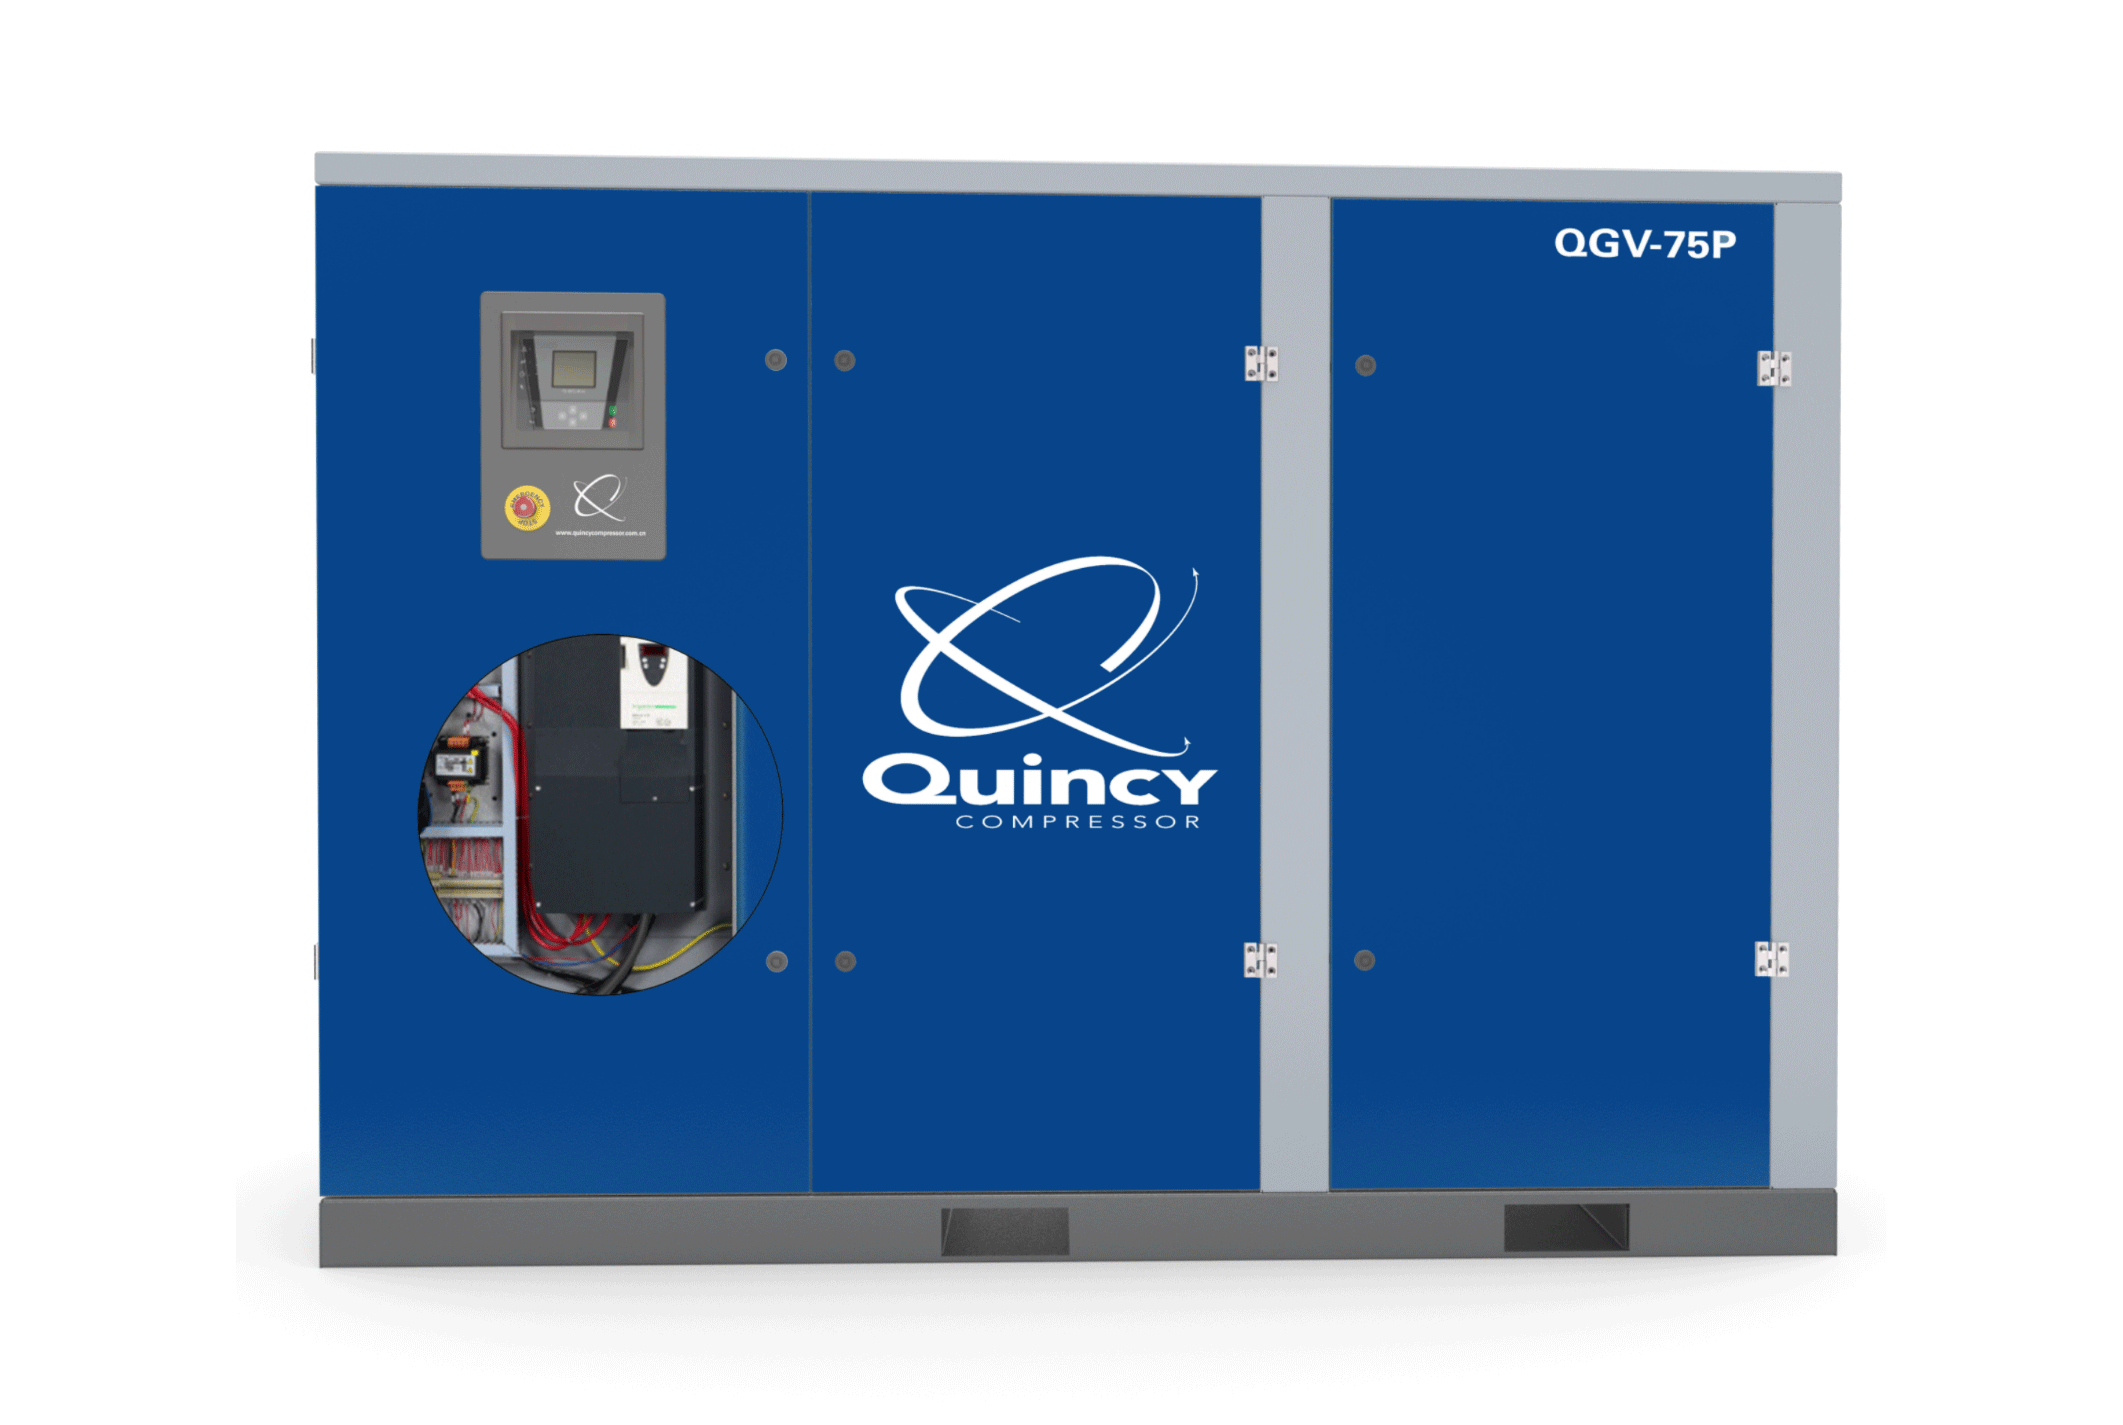 QGVP oil injection screw air compressor